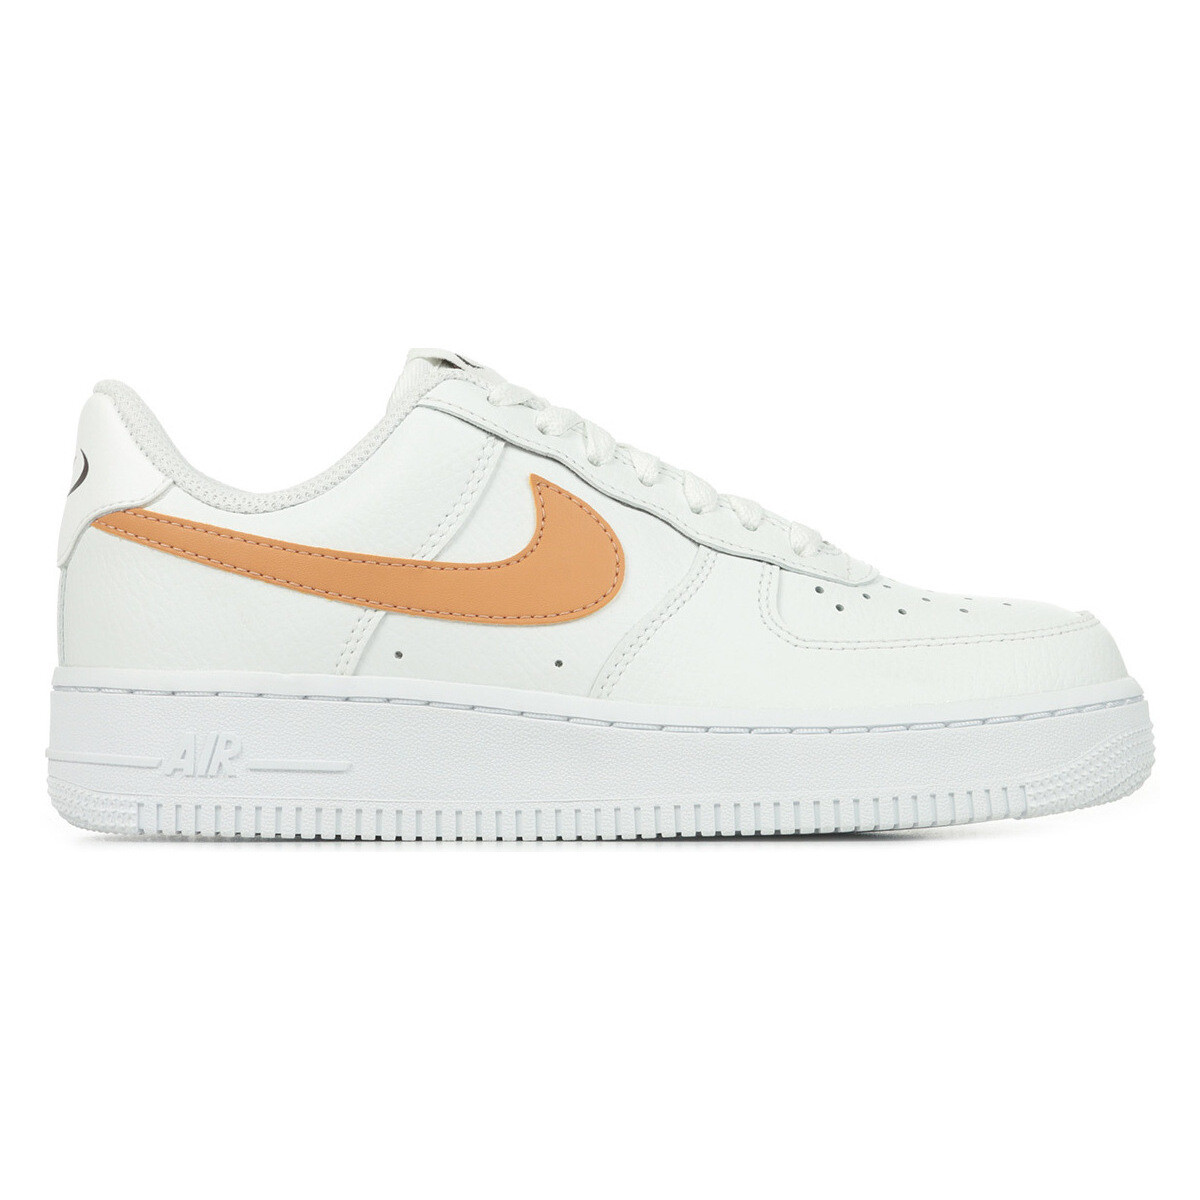 Chaussures Femme Baskets mode Nike Air Force 1 '07 Blanc